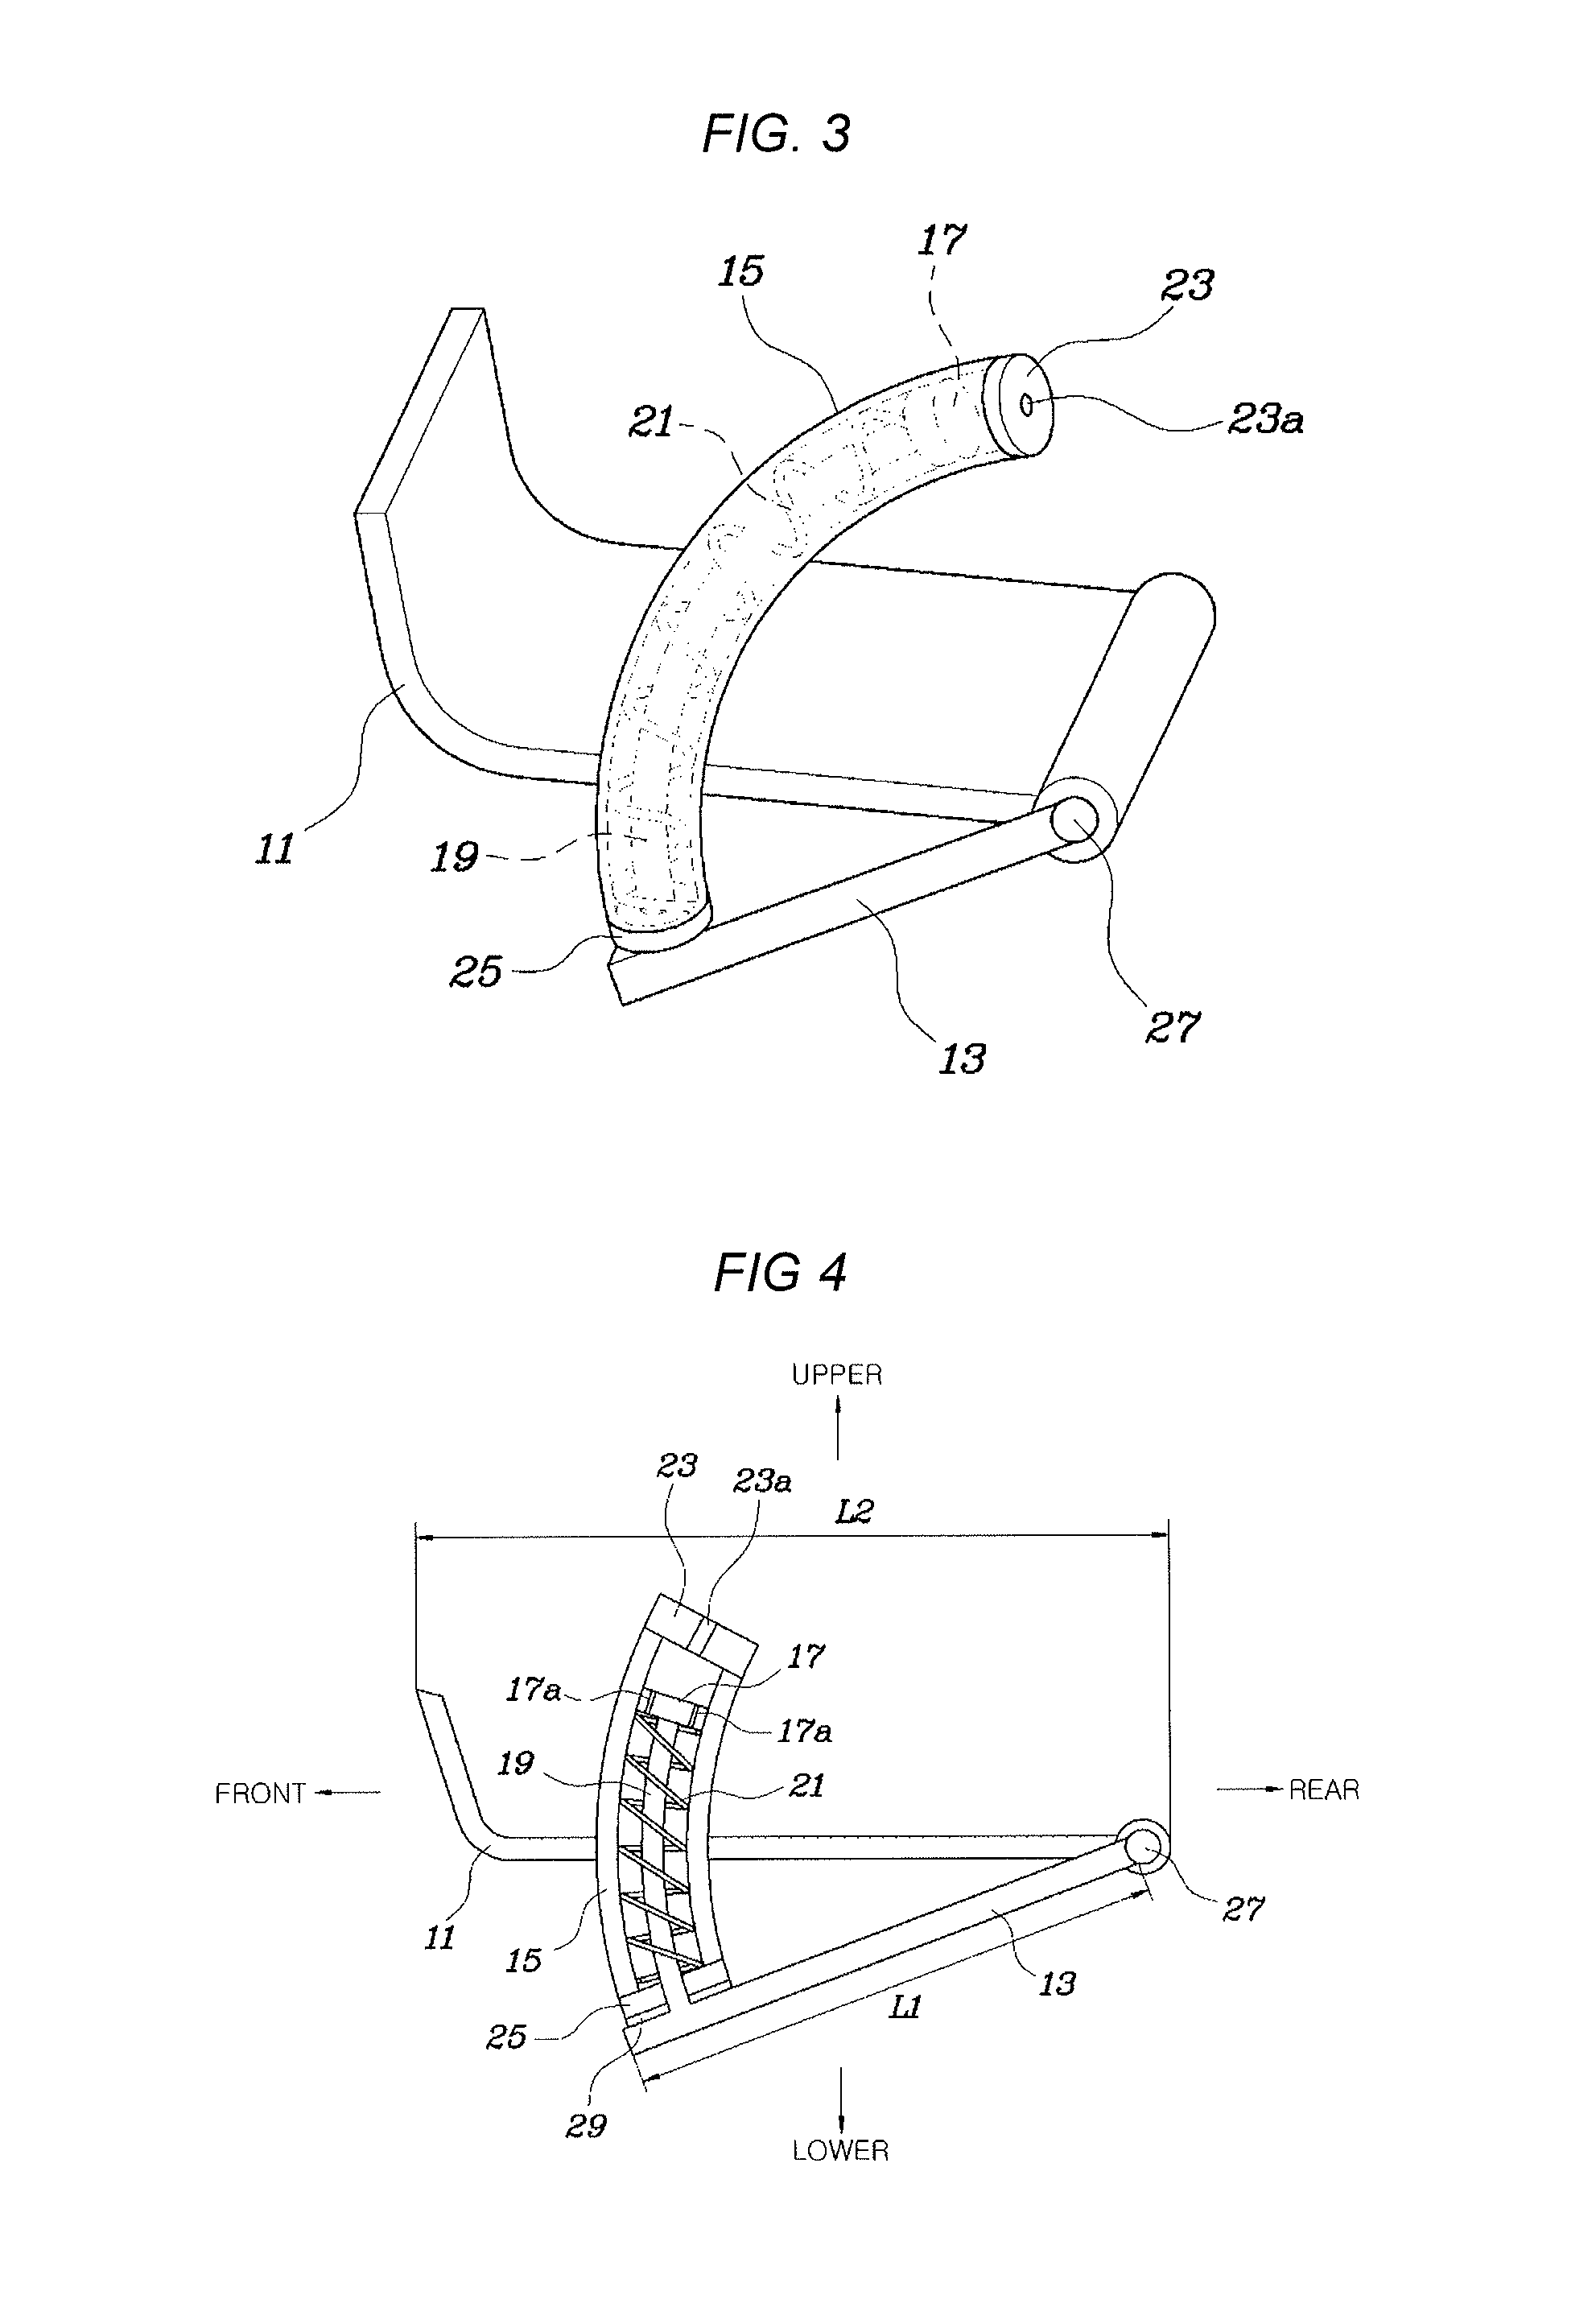 Front spoiler apparatus for vehicle